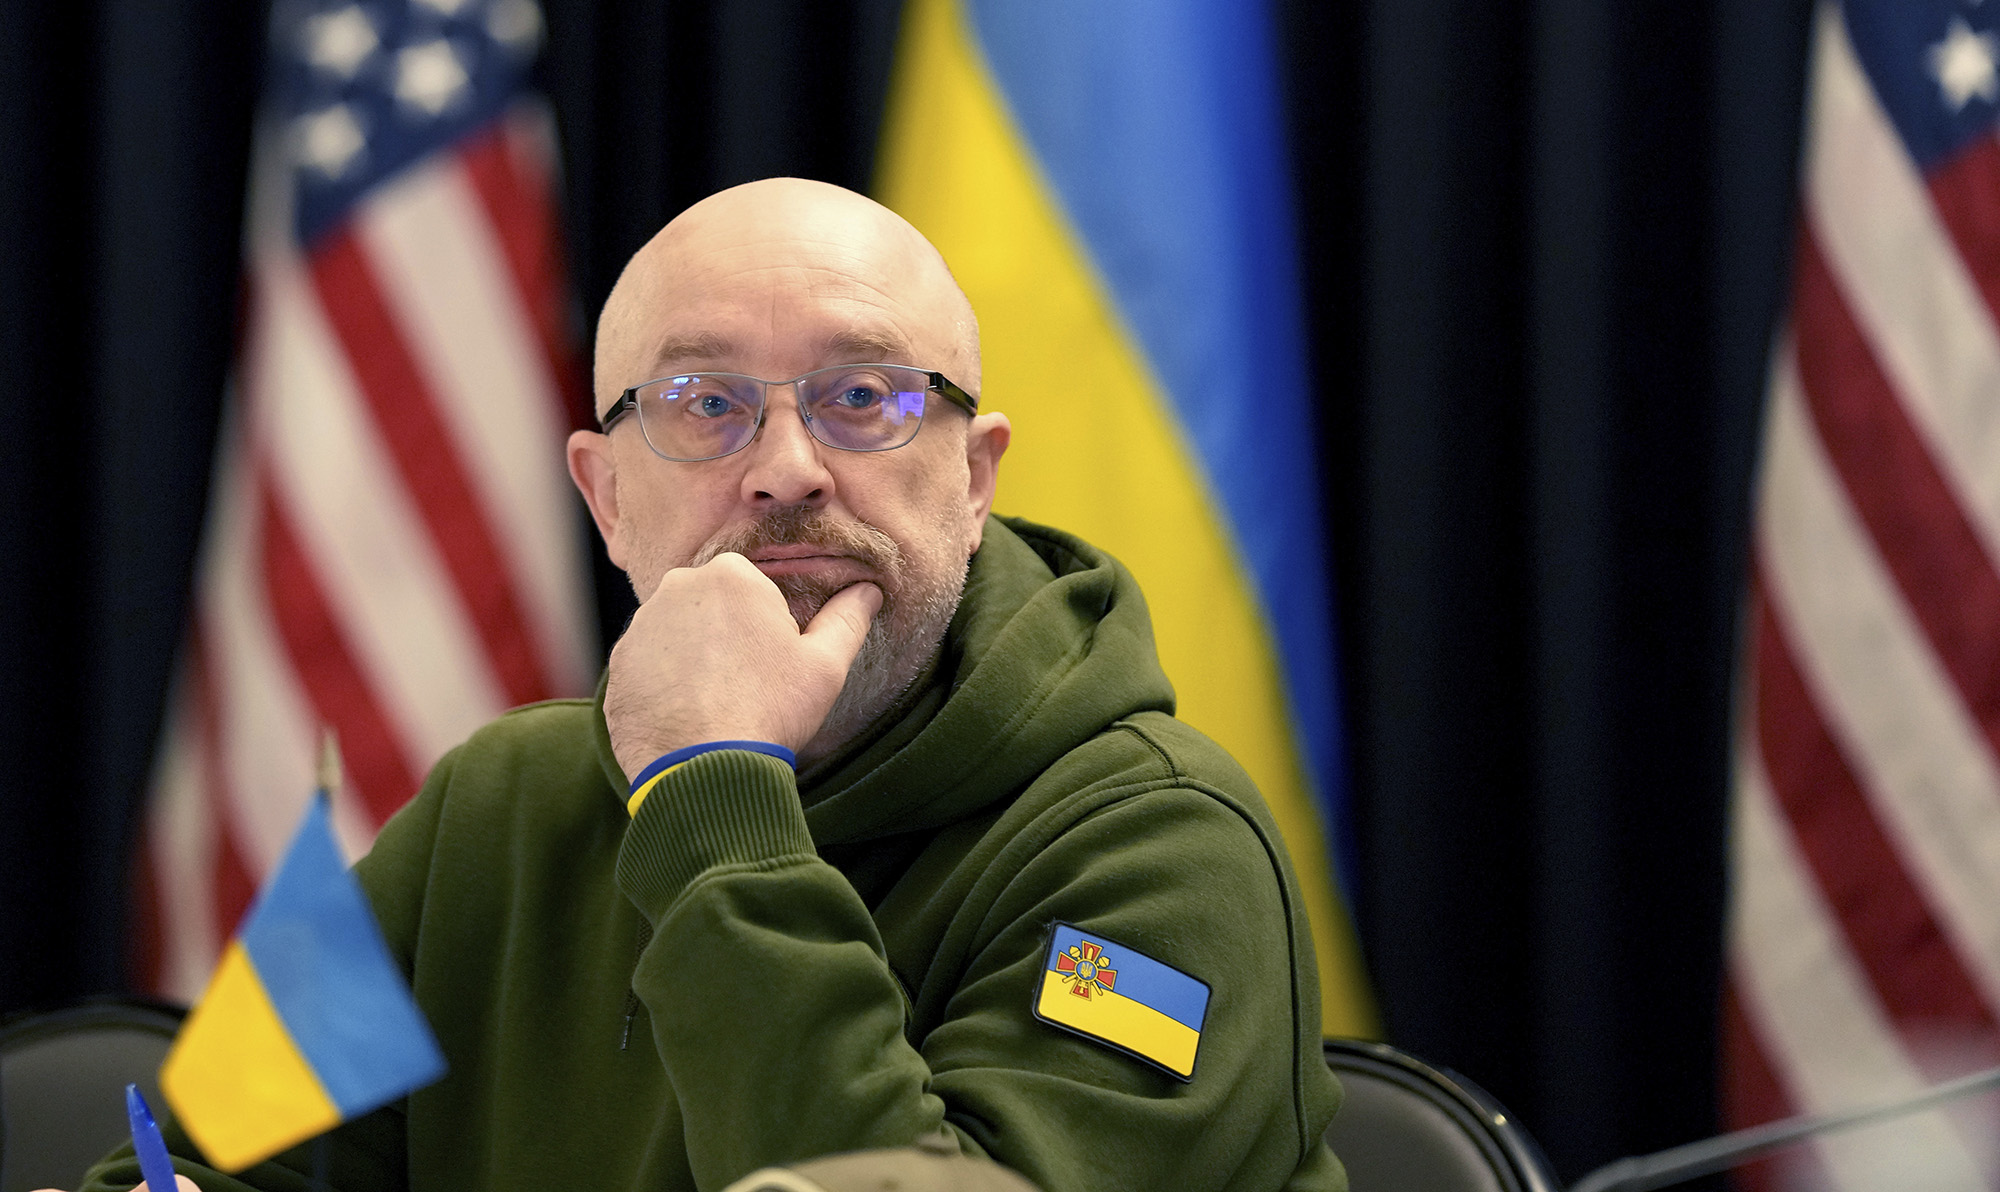 Ukrainian Minister of Defense Oleksii Reznikov attends the meeting of the 'Ukraine Defense Contact Group' at Ramstein Air Base in Ramstein, Germany, on January 20.